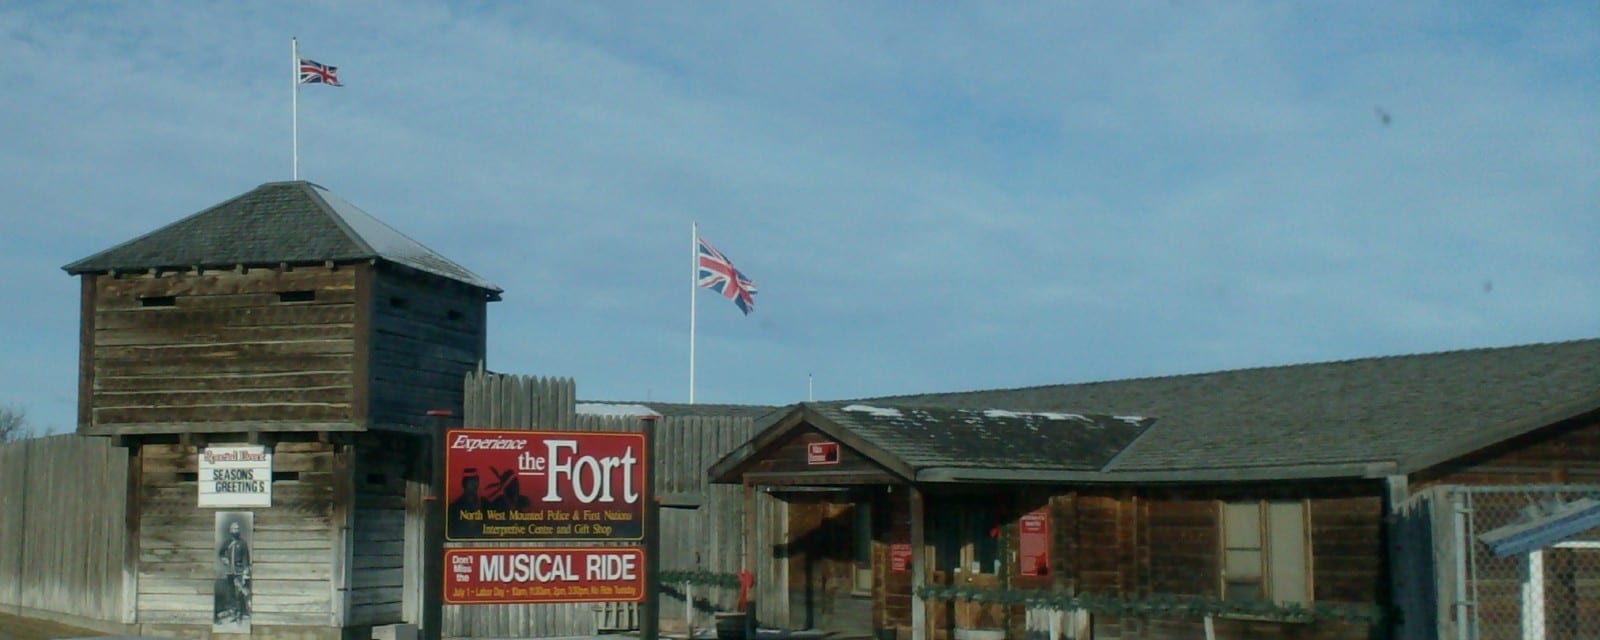 picture of fort macleod